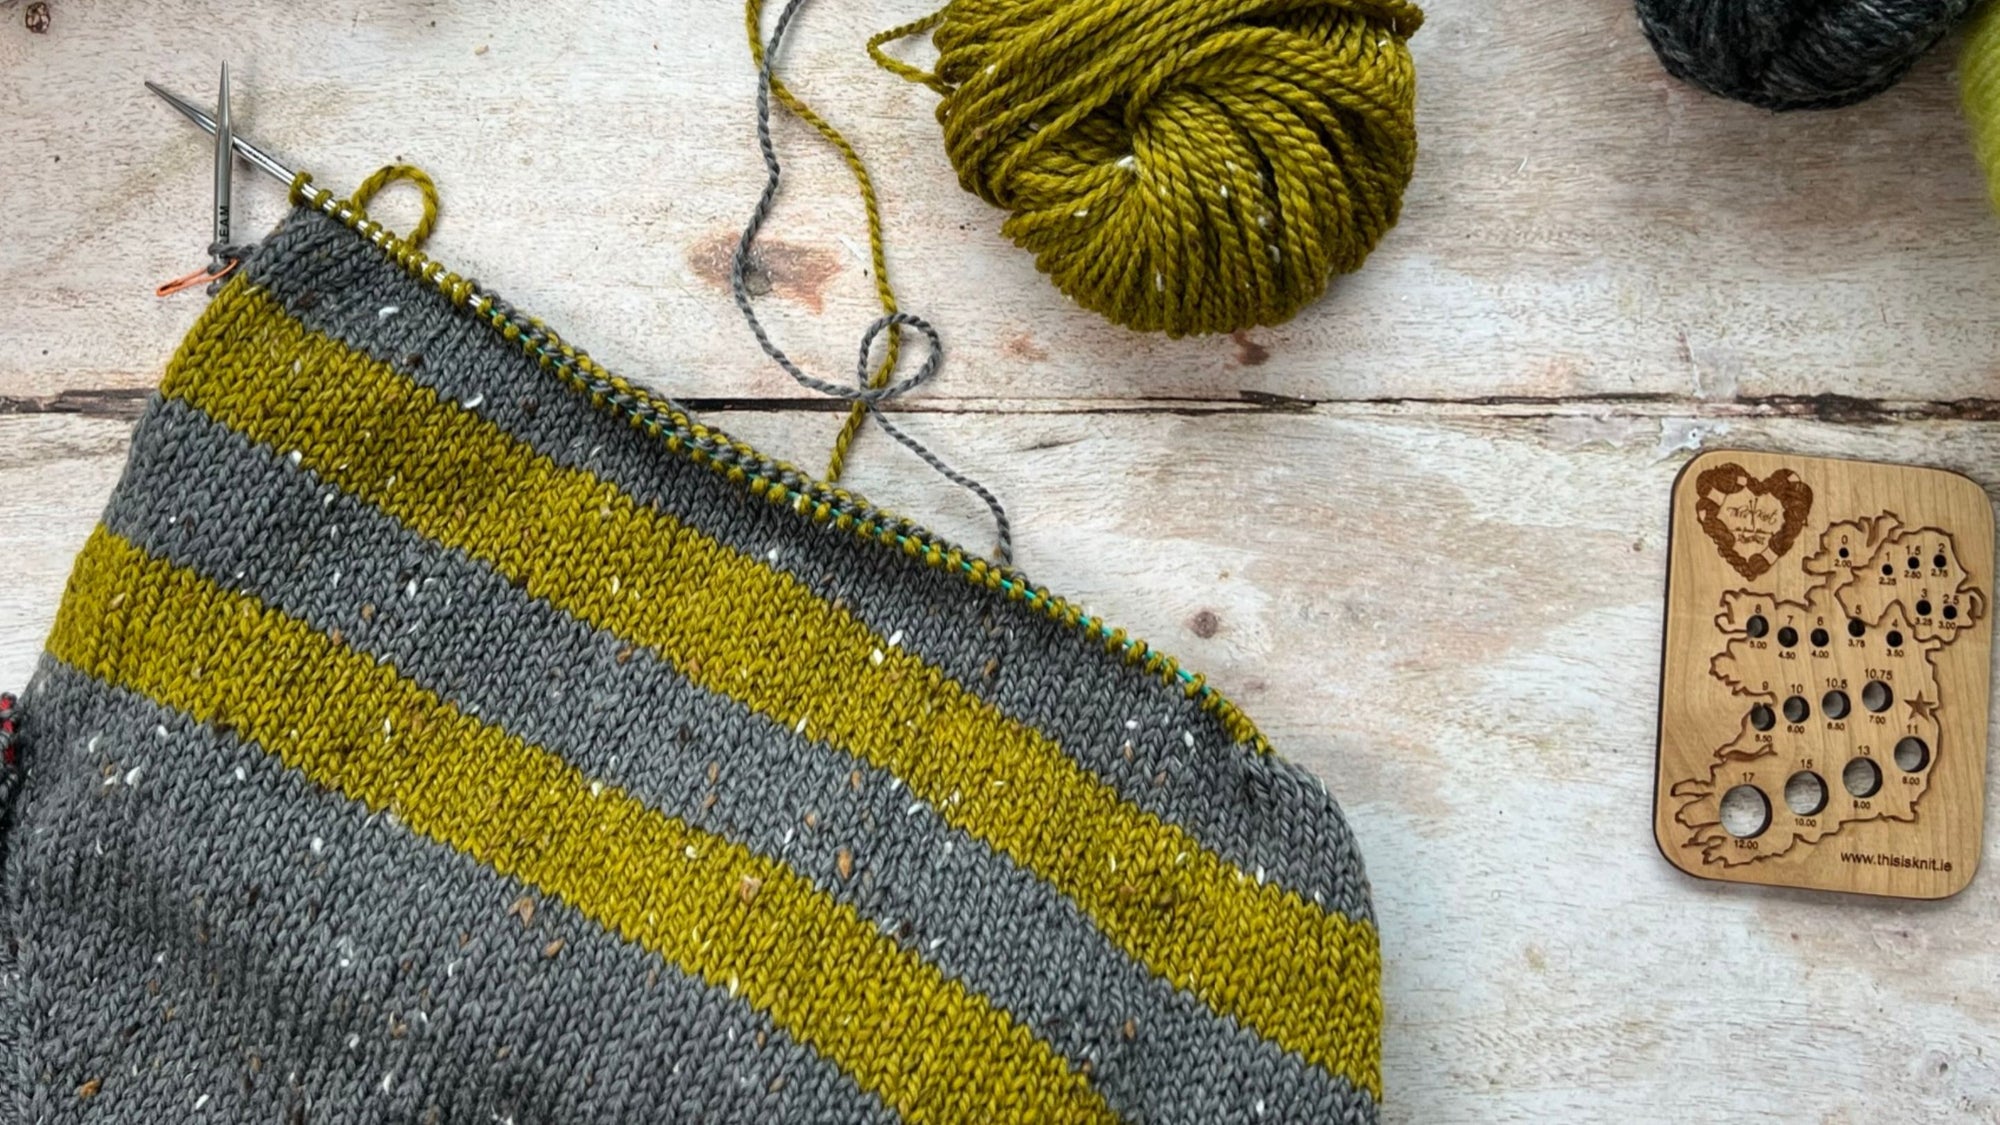 A top down view of a striped sweater in progress, knit in the round, using grey and yellow/green yarn. A needle gauge in the shape of Ireland lies to the right hand side.